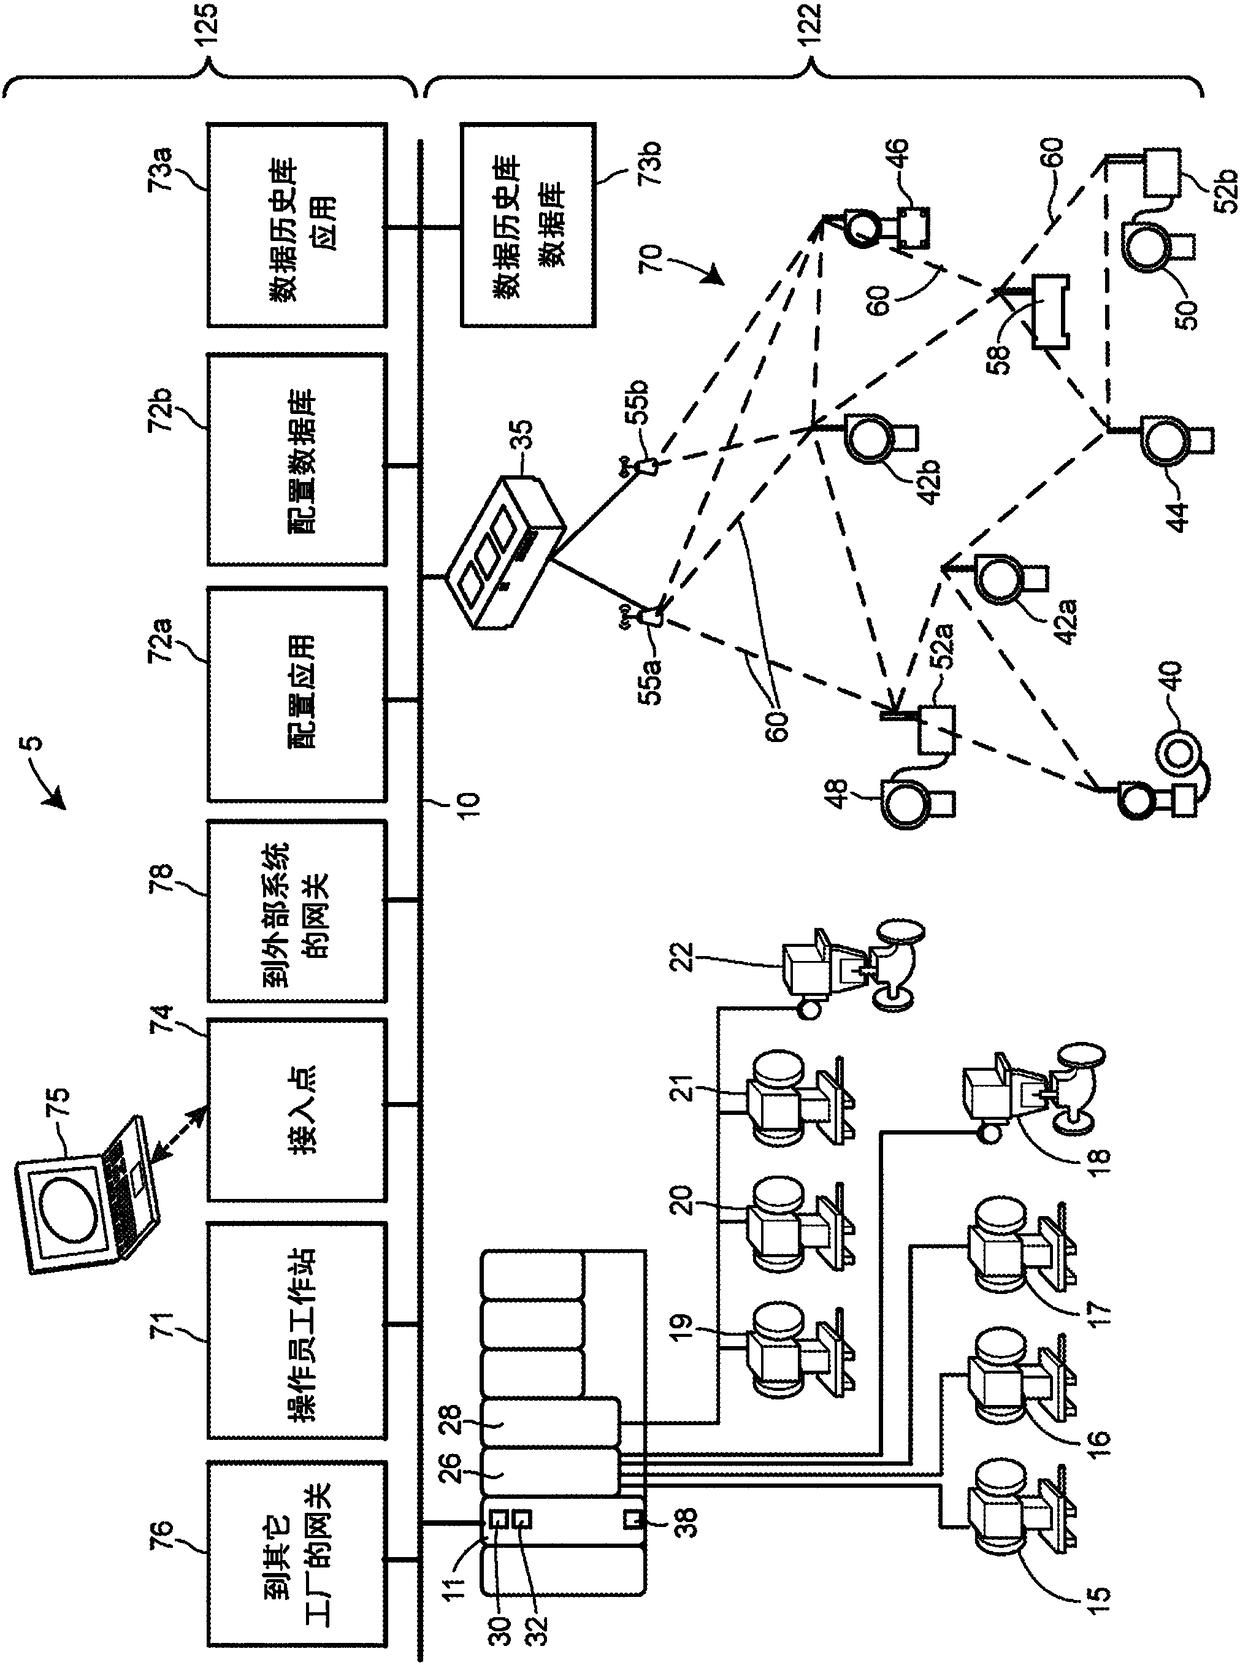 Automatic distribution of device parameters for commissioning portions of a disconnected process control loop